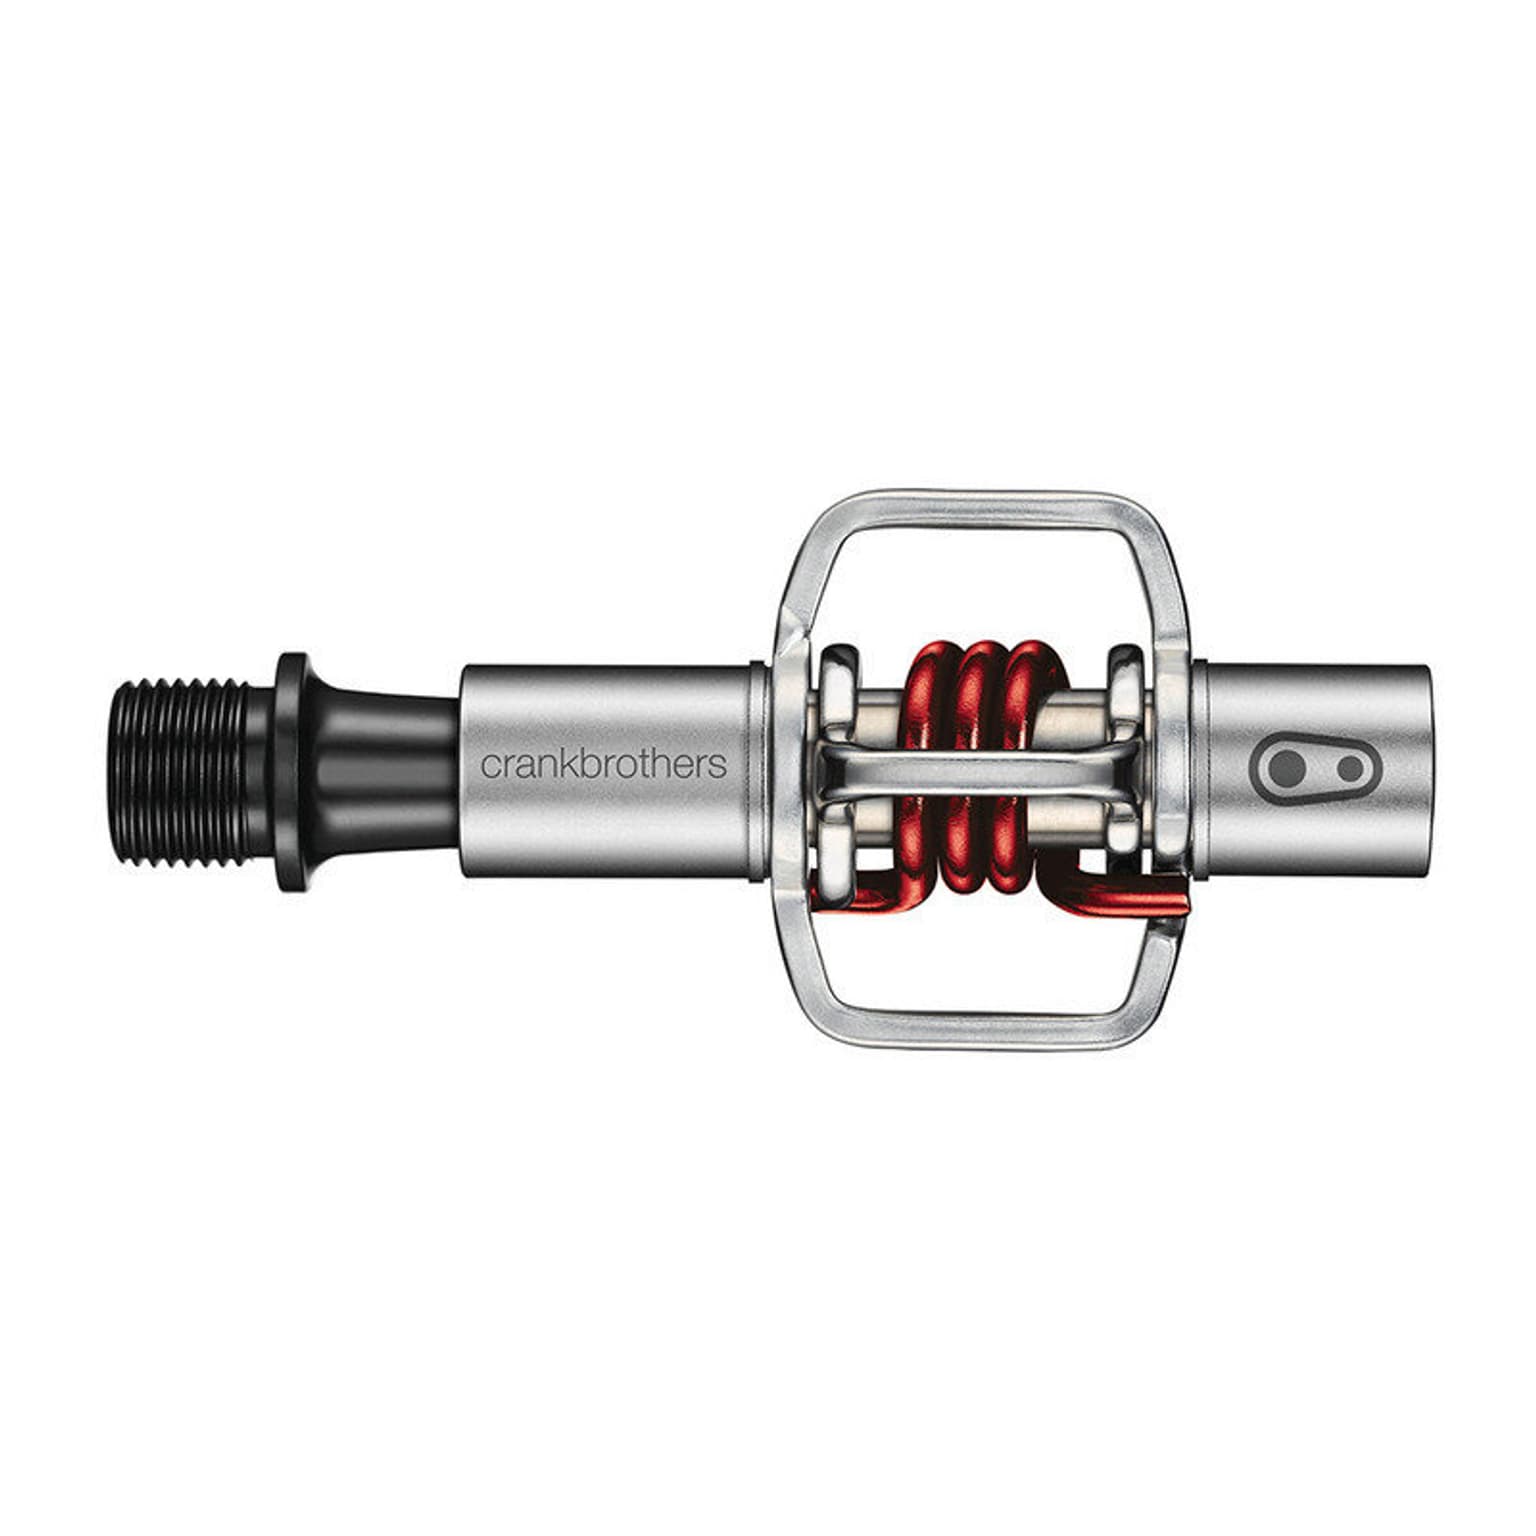 crankbrothers crankbrothers Pedale Egg Beater 1 Pedali 1